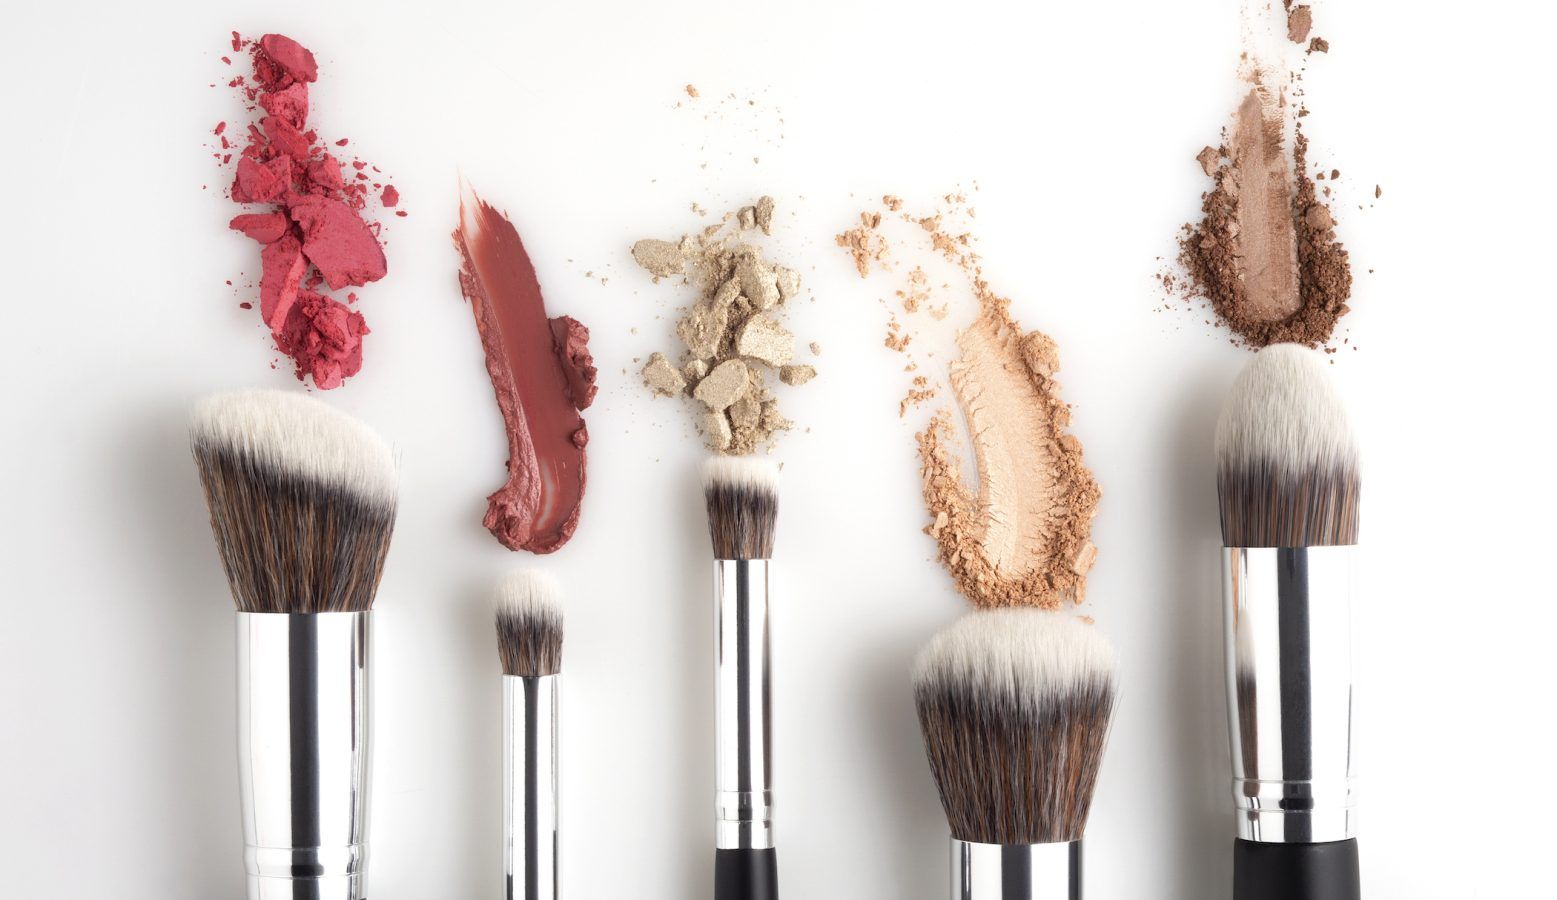 How to clean your kit, sponges and brushes